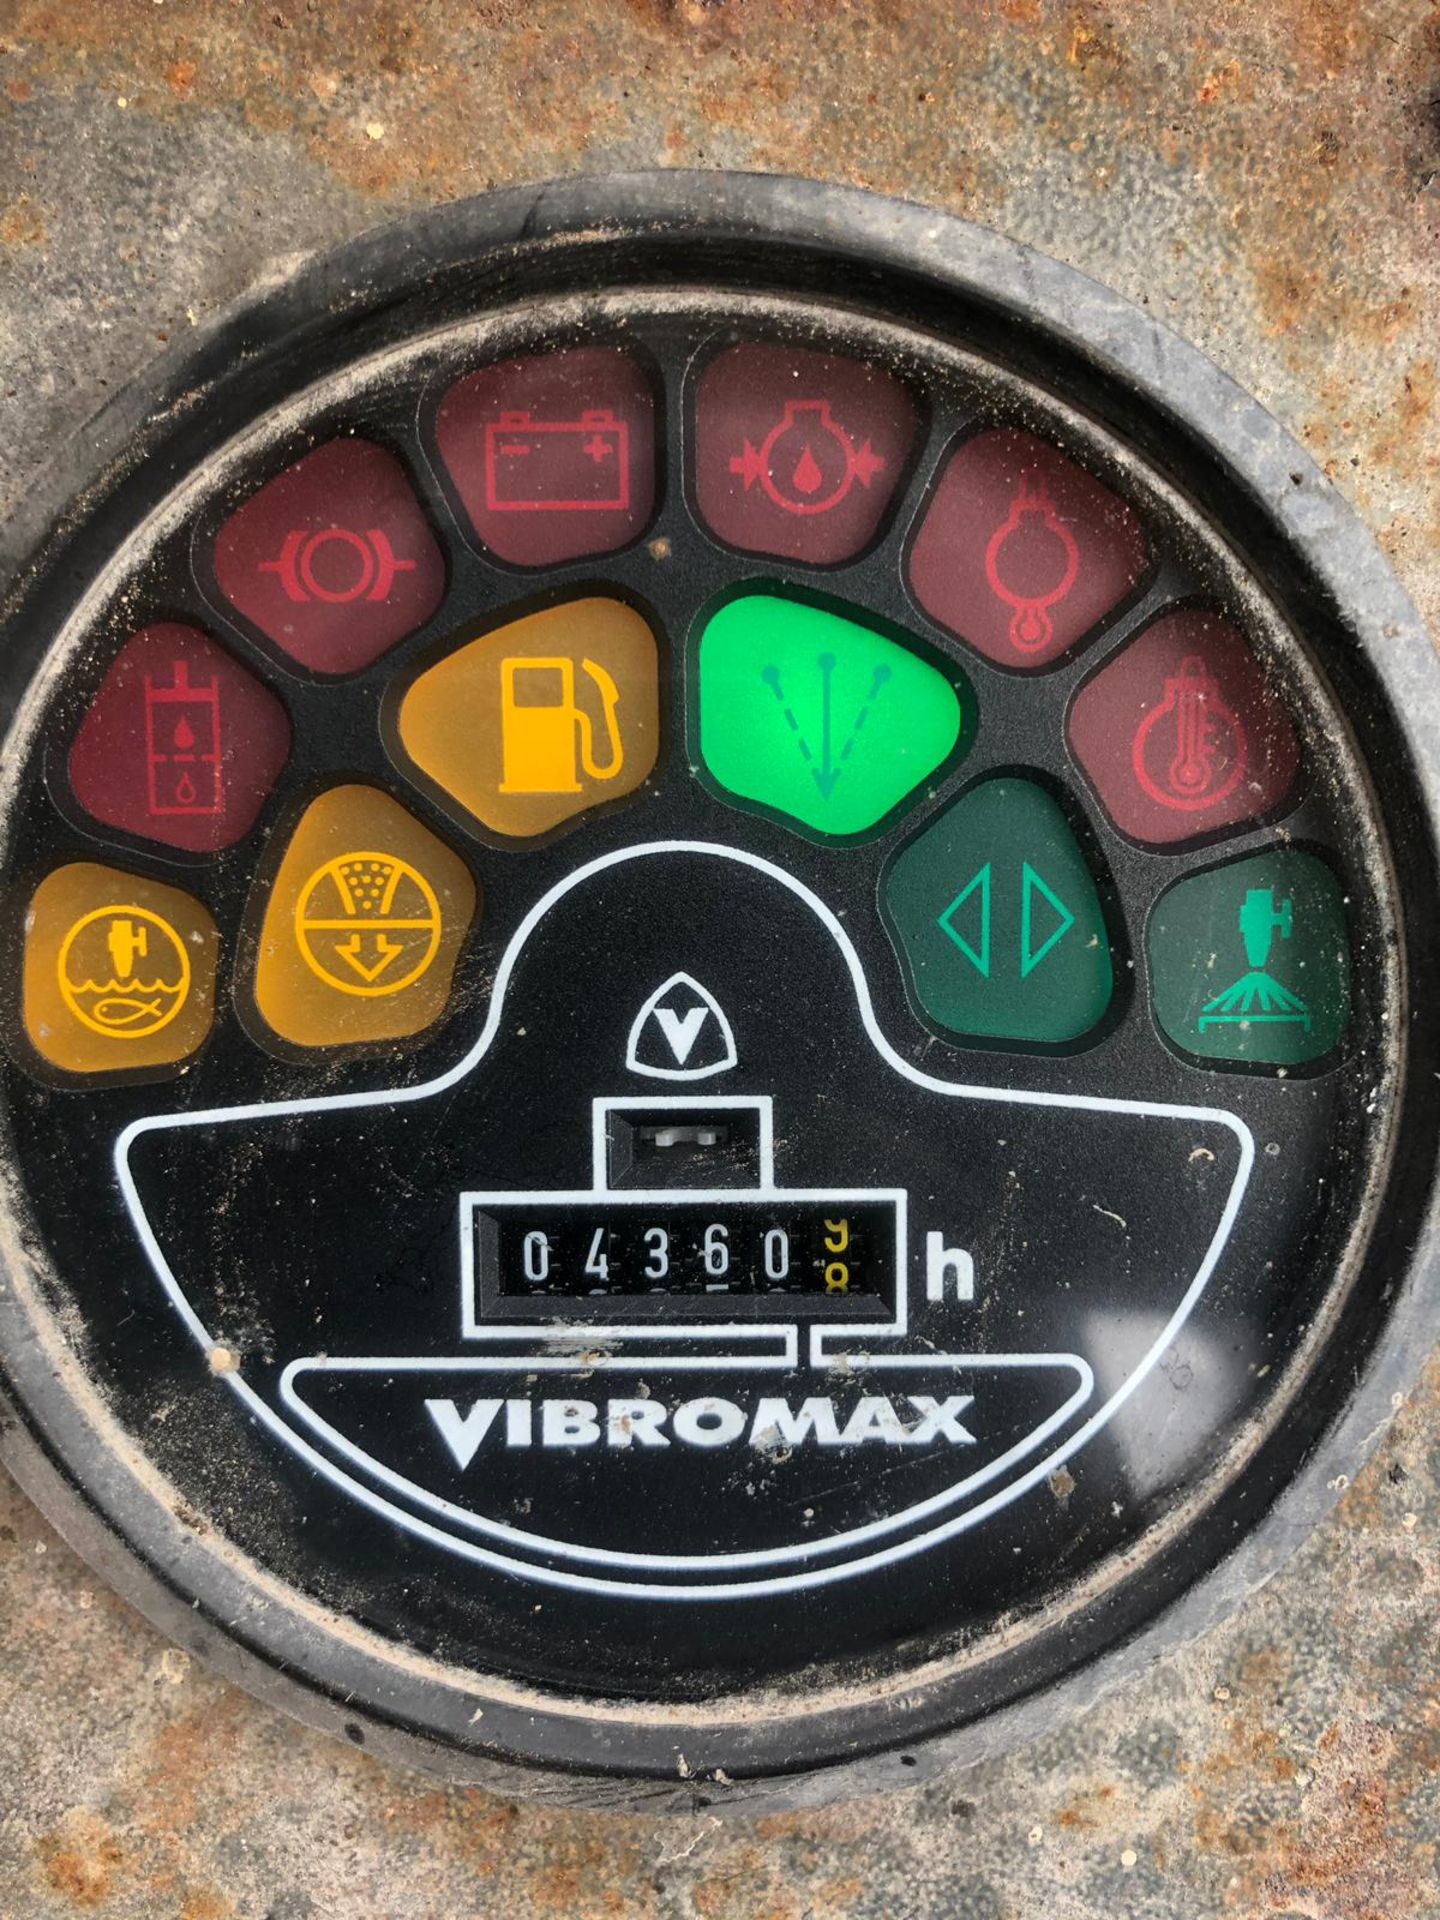 VIBROMAX W752 ROLLER, YEAR UNKNOWN, RUNS WORKS AND VIBRATES *PLUS VAT* - Image 6 of 6